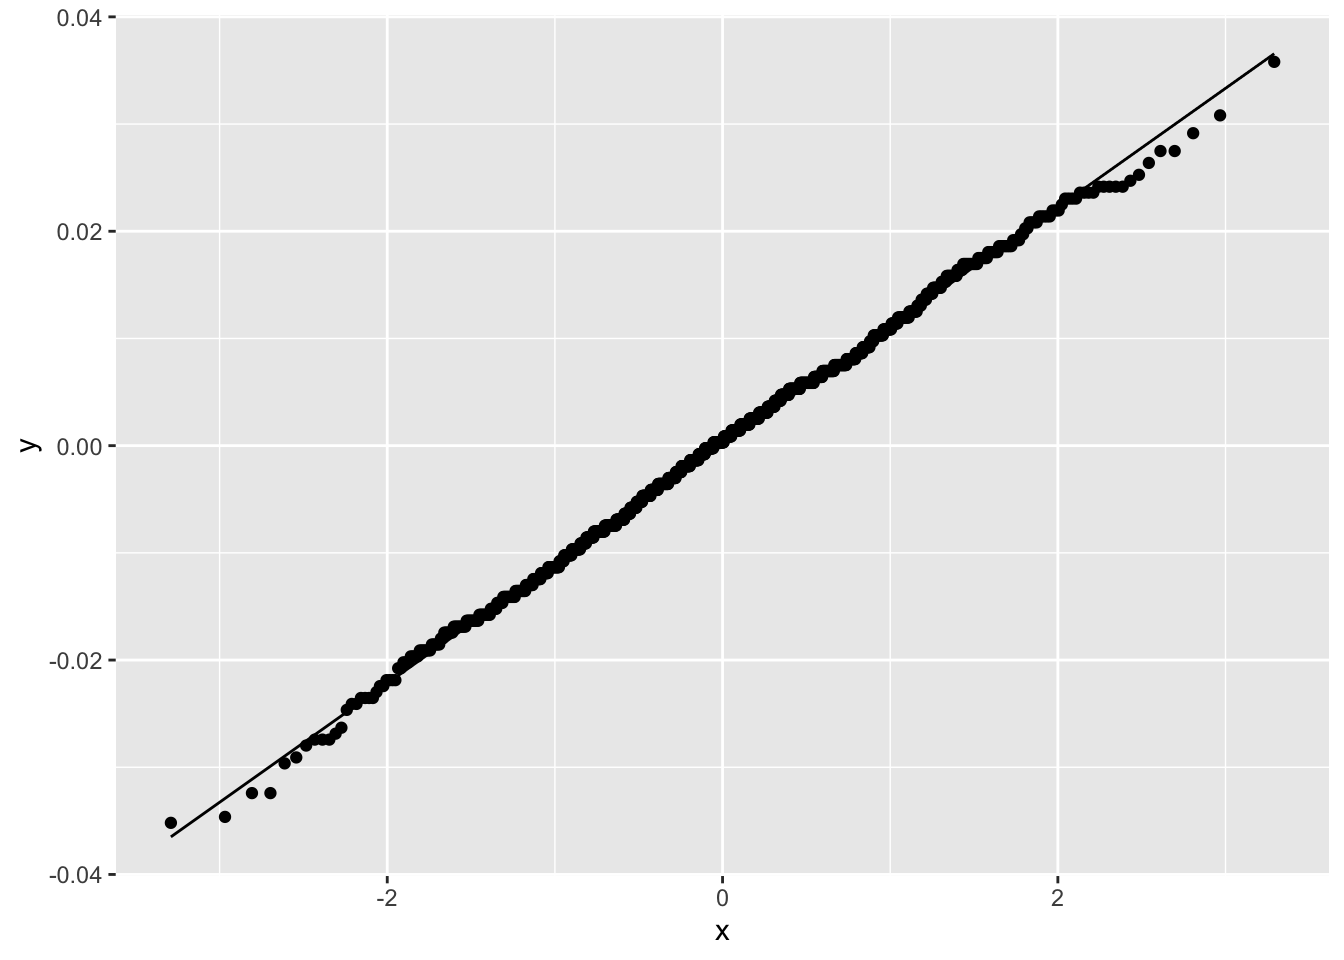 Normal Q-Q Plot for Sampling Distribution of Difference in C-Section Proportions